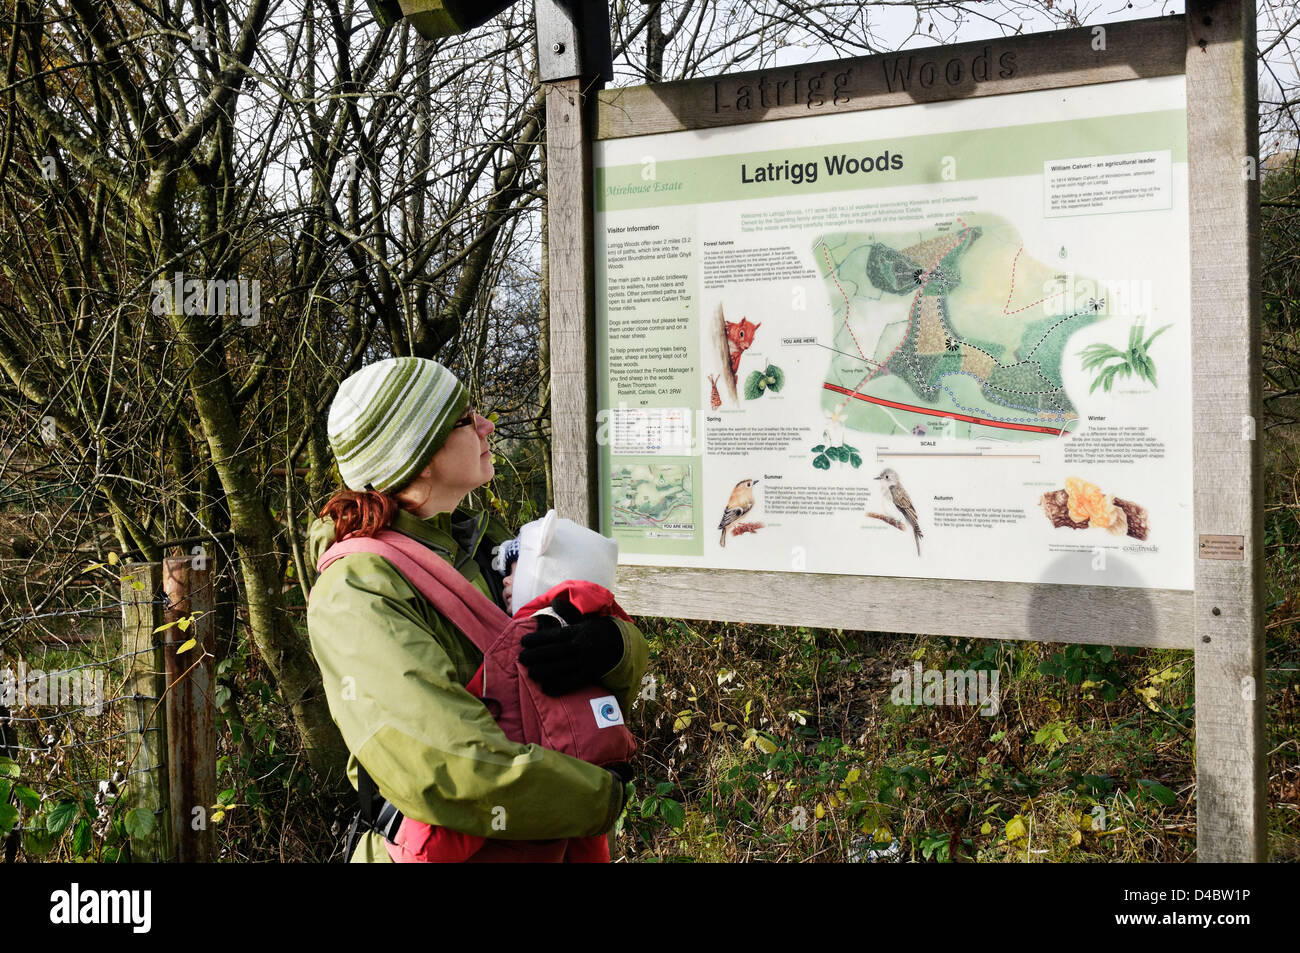 A woman carrying a baby in a baby carrier reading the information board for Latrigg Woods, Lake District Stock Photo